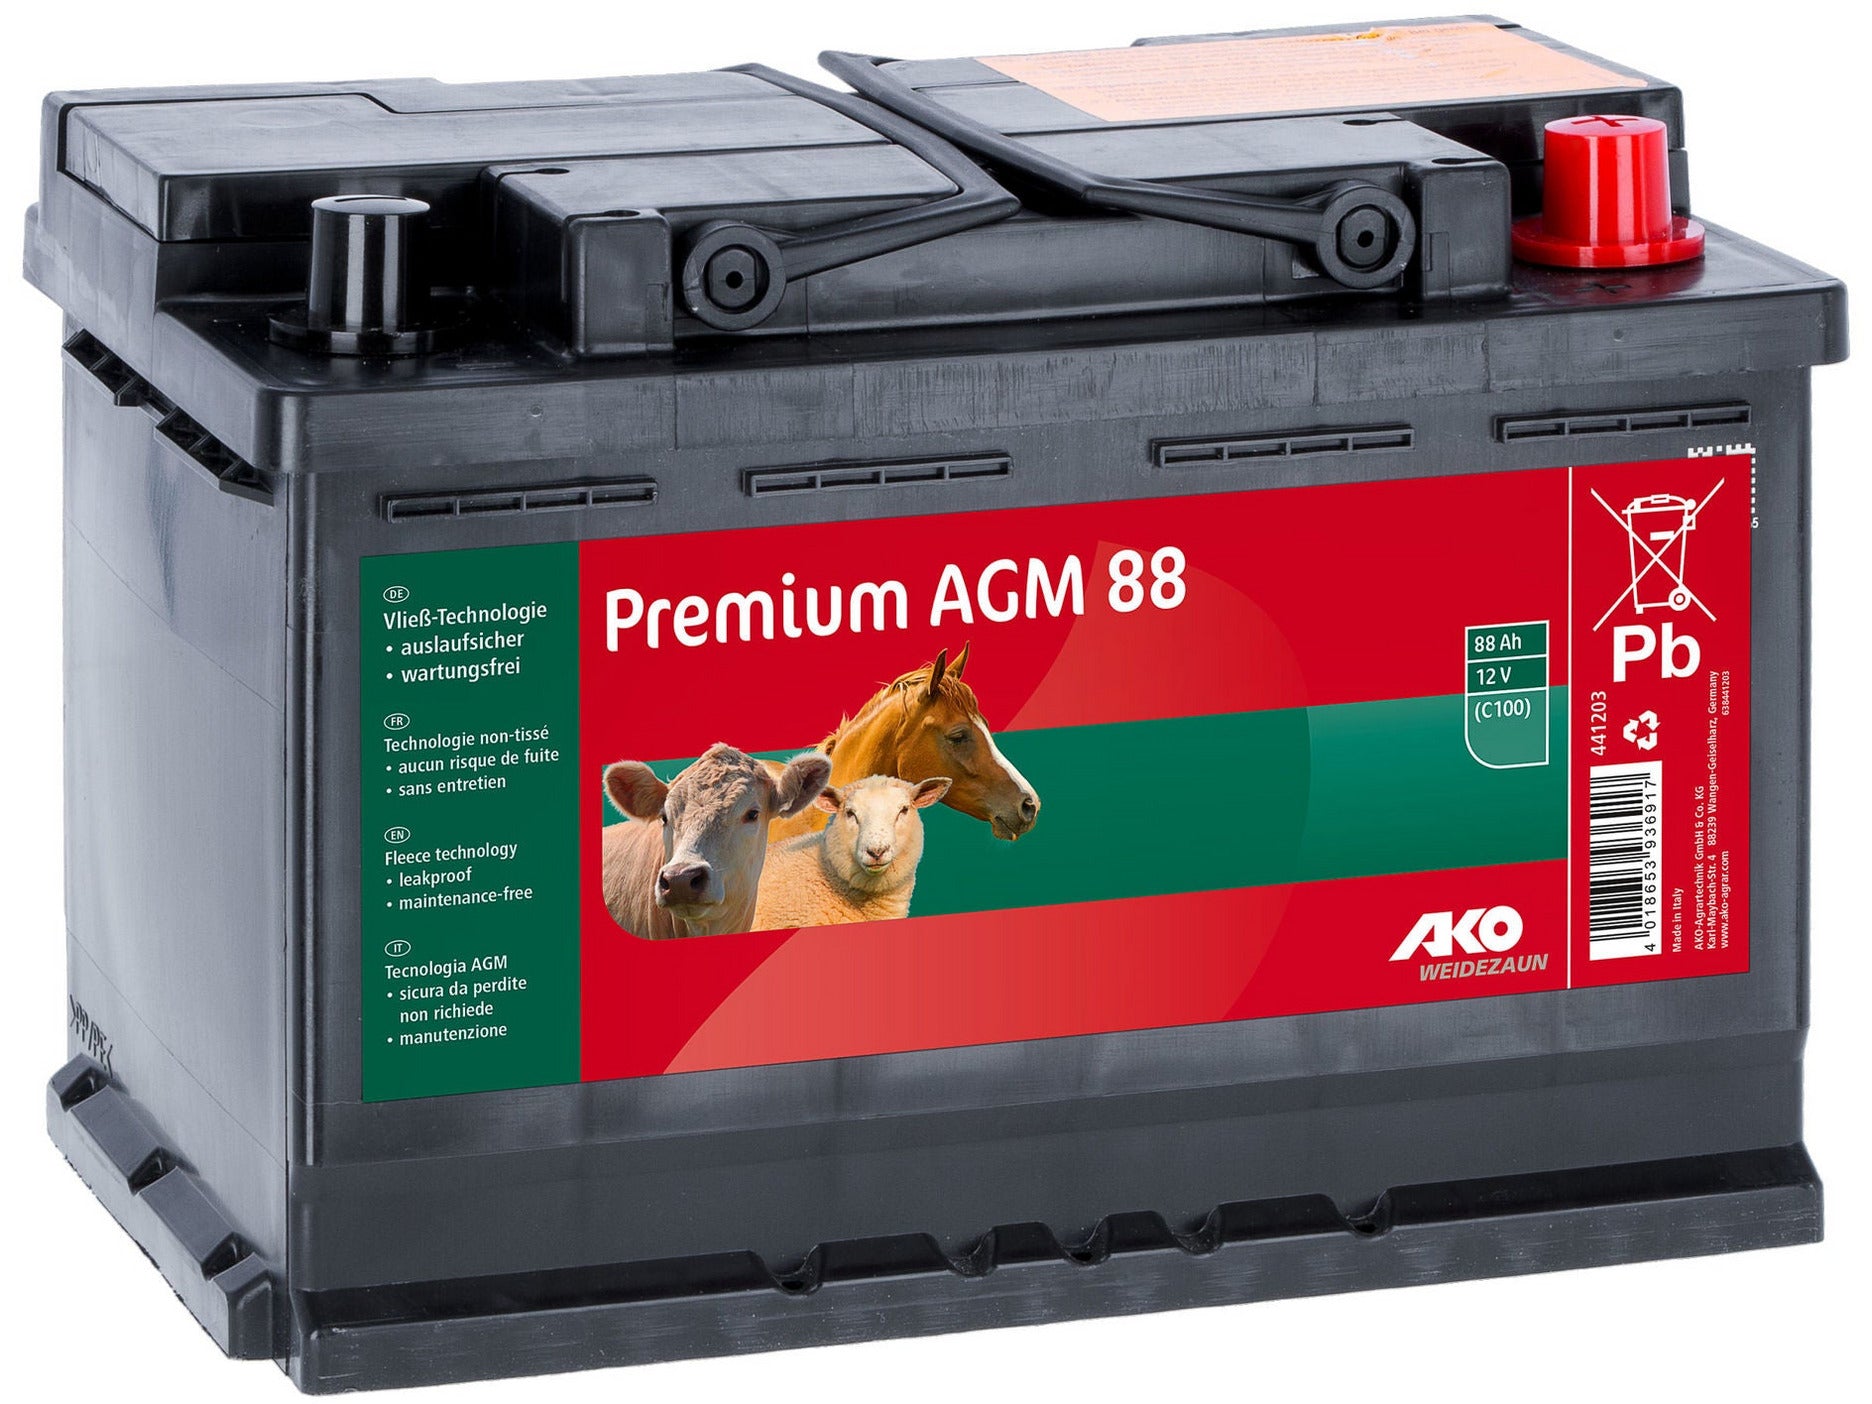 AKO Premium AGM fleece battery for electric fence energisers